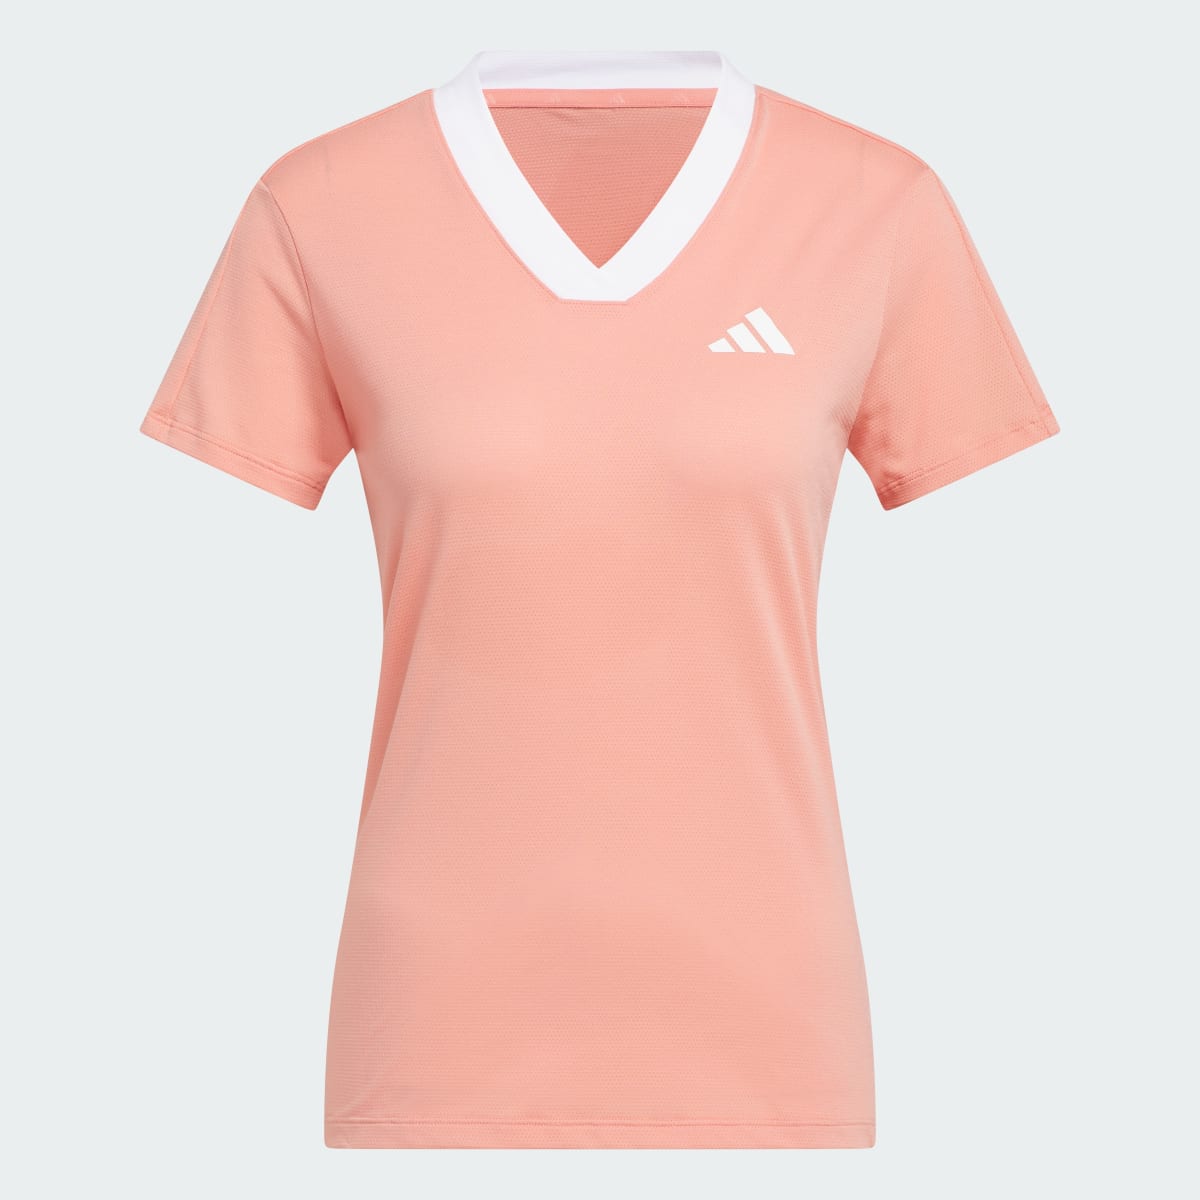 Adidas Camisola Made With Nature. 5